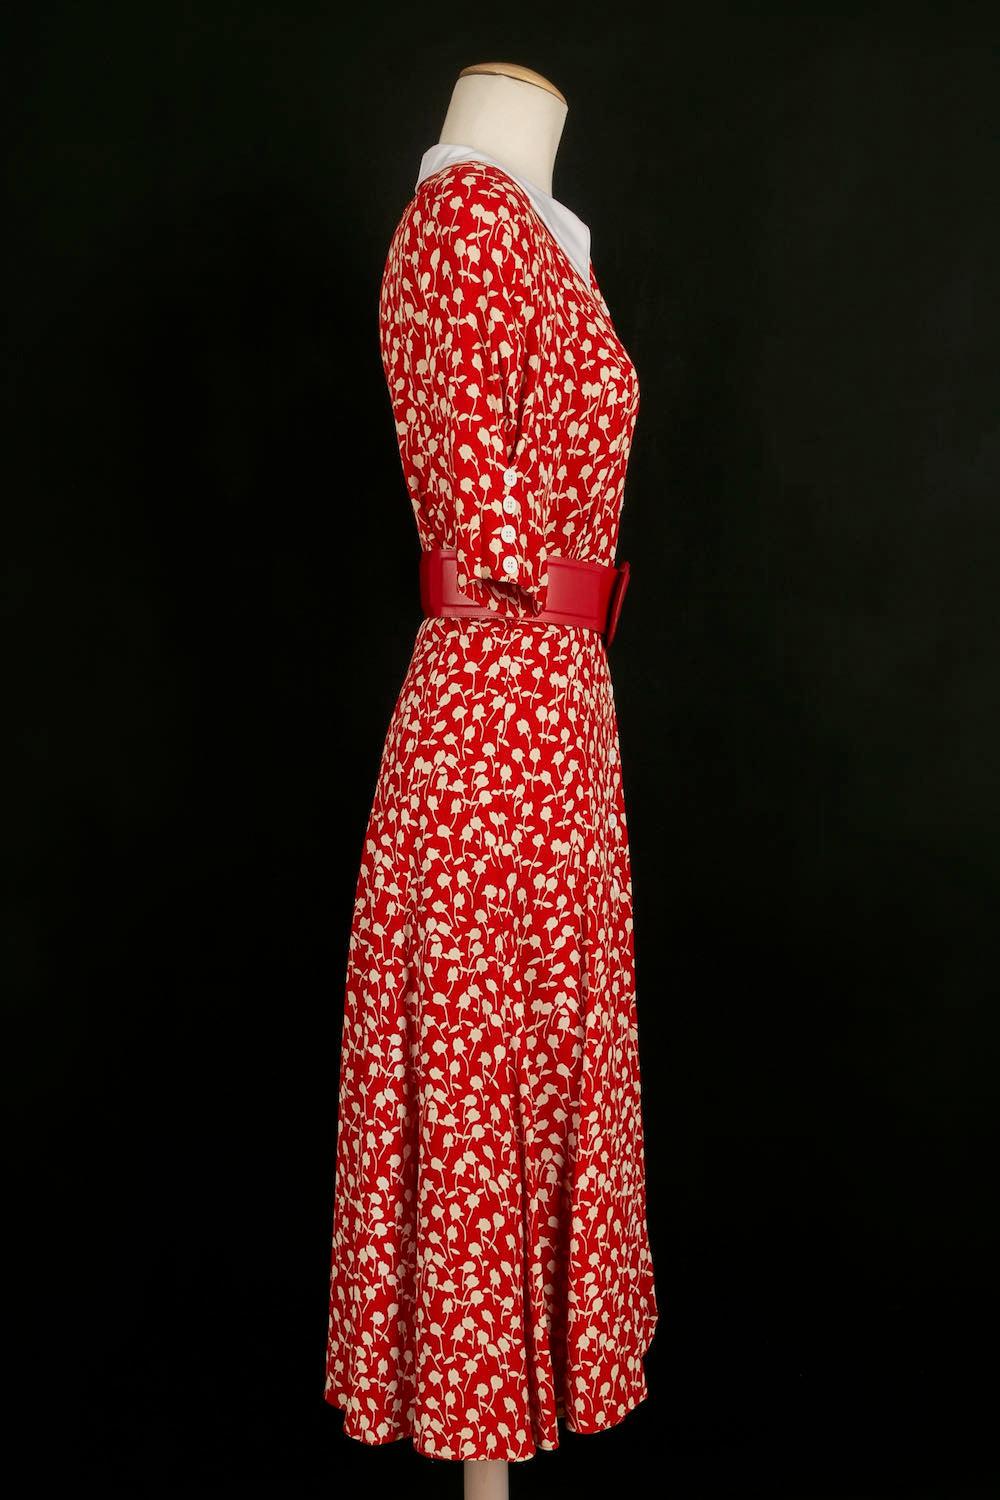 Louis Féraud -(Made in Germany) Red dress with red leather belt. Size indicated 38FR.

Additional information: 
Dimensions: Shoulder width: 37 cm, Chest: 44 cm, Waist: 31 cm
Condition: Very good condition
Seller Ref number: VR44